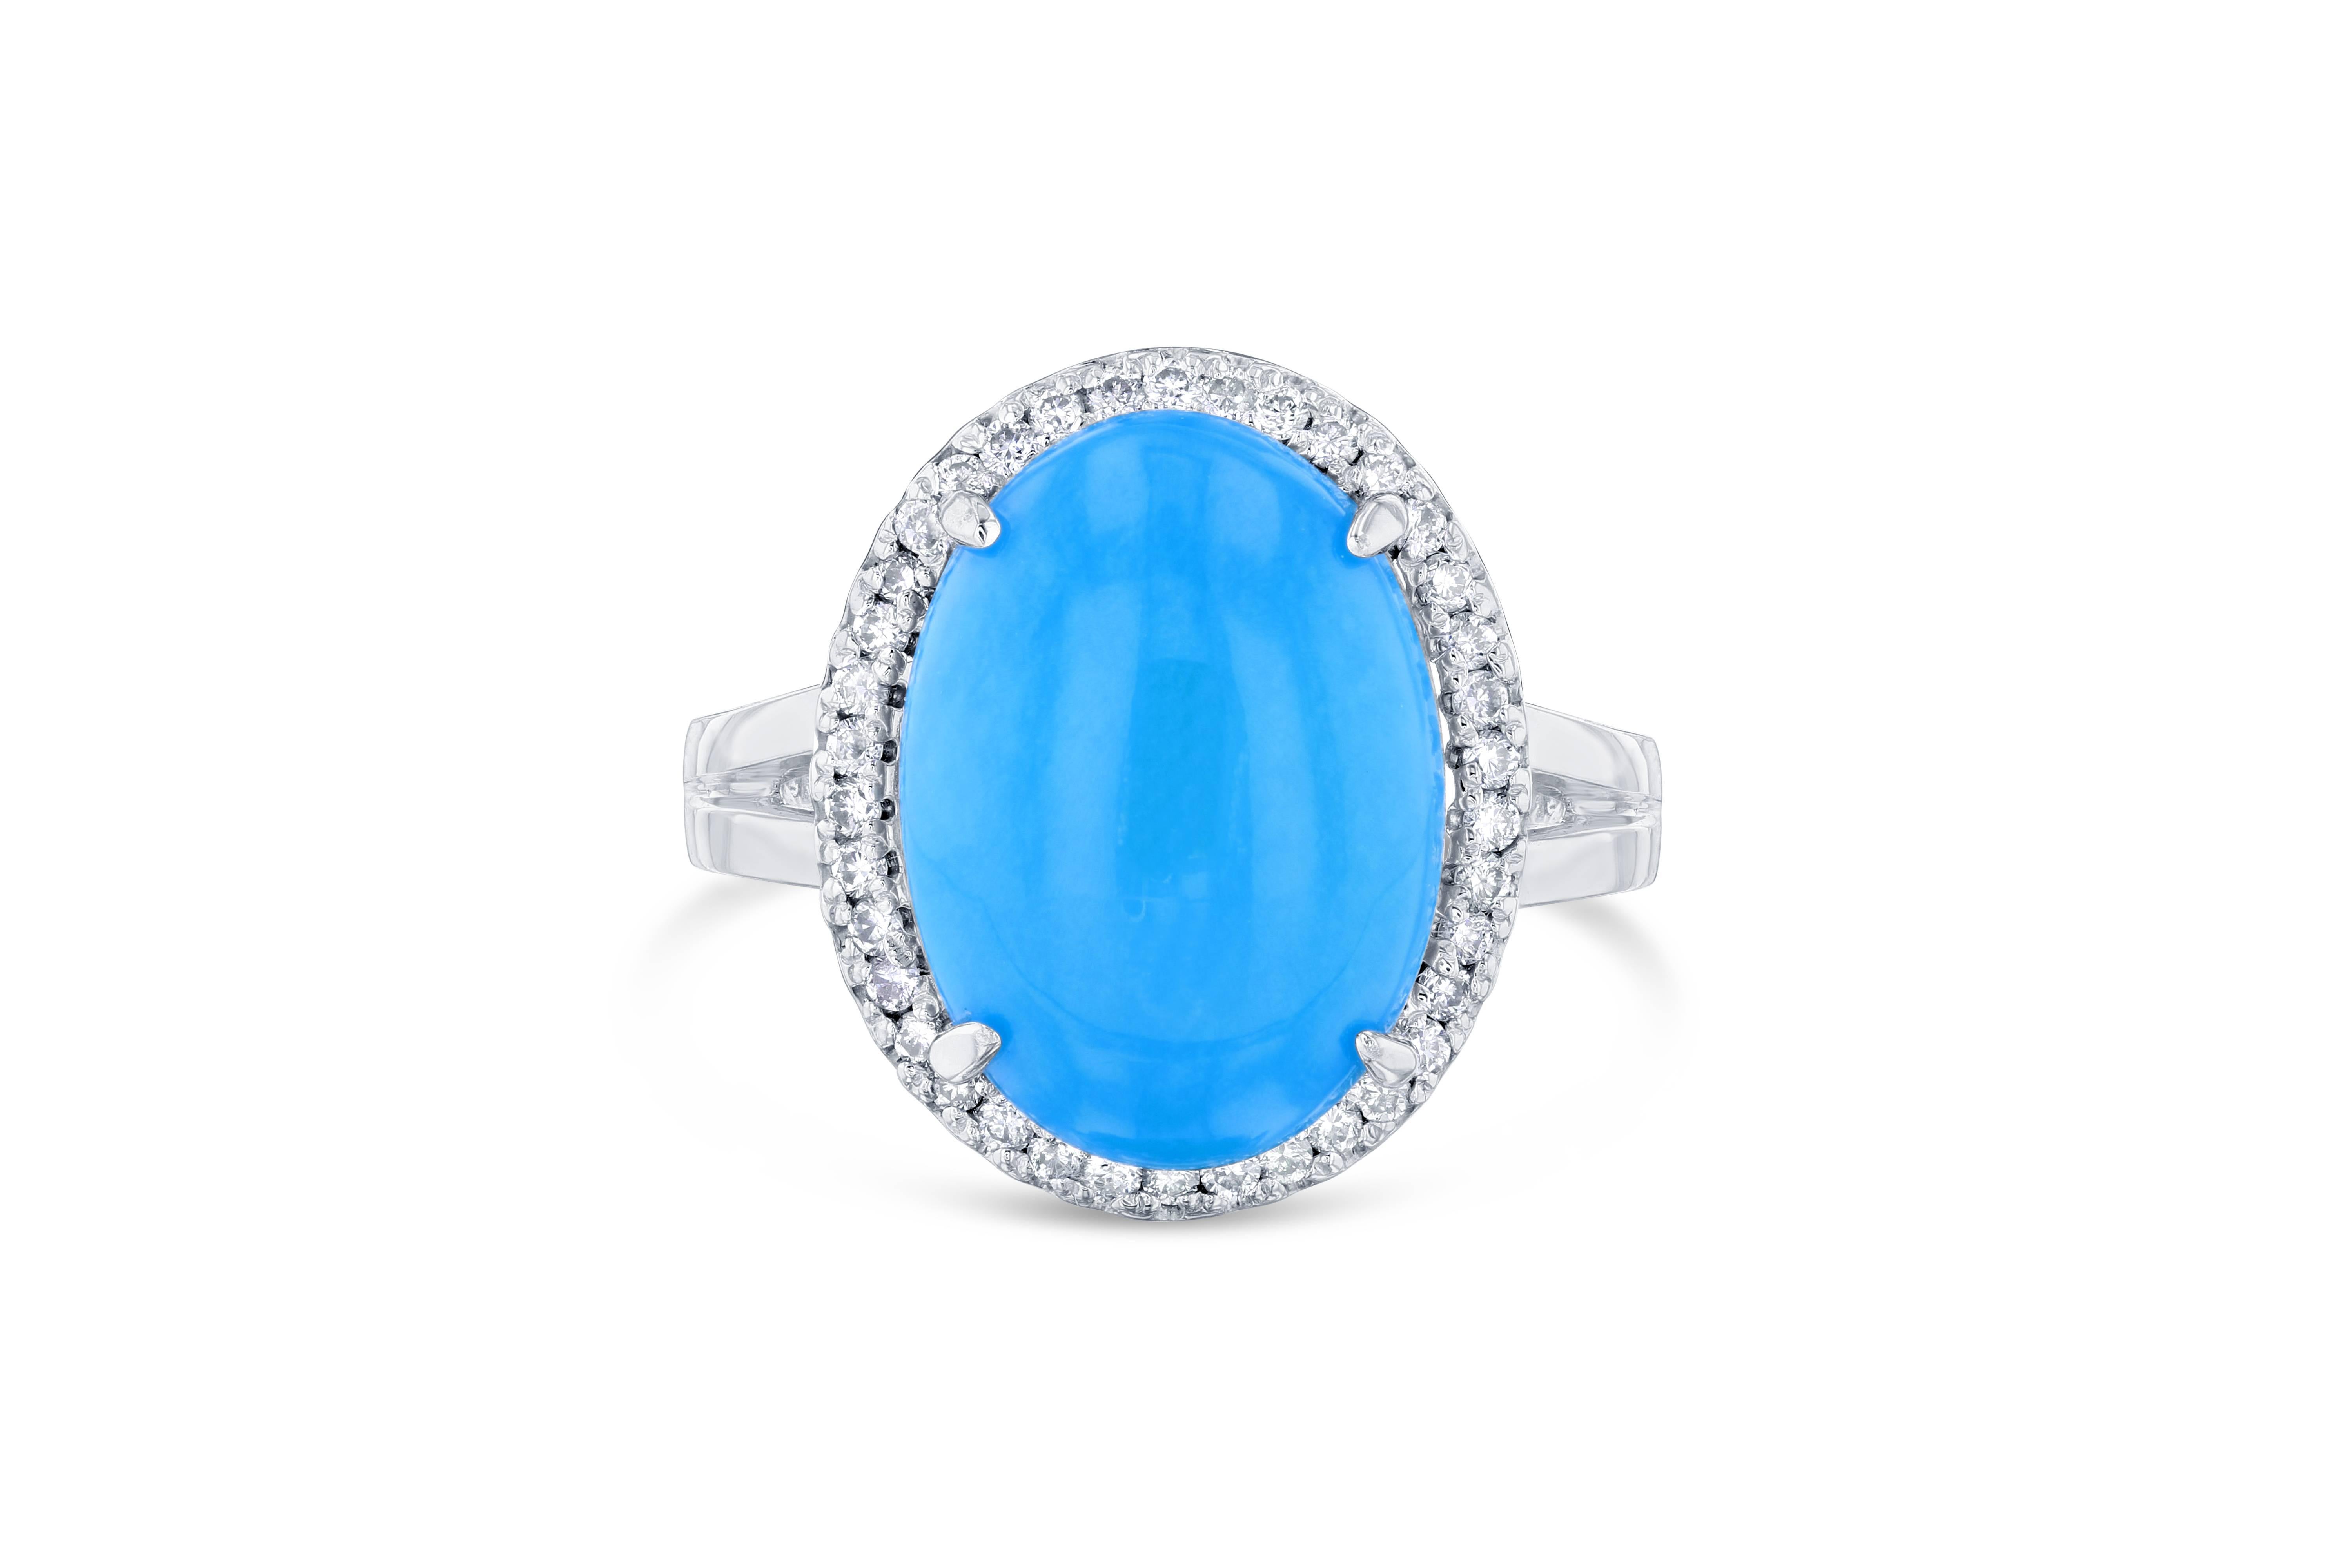 Beautiful Turquoise Diamond Cabochon Cocktail Ring!
The Oval Cut Cabochon Turquoise is 4.48 carats and has a halo of 40 Round Cut Diamonds weighing 0.24 carats.  The total carat weight of the ring is 4.72 carats.

It is crafted in 14K Yellow Gold